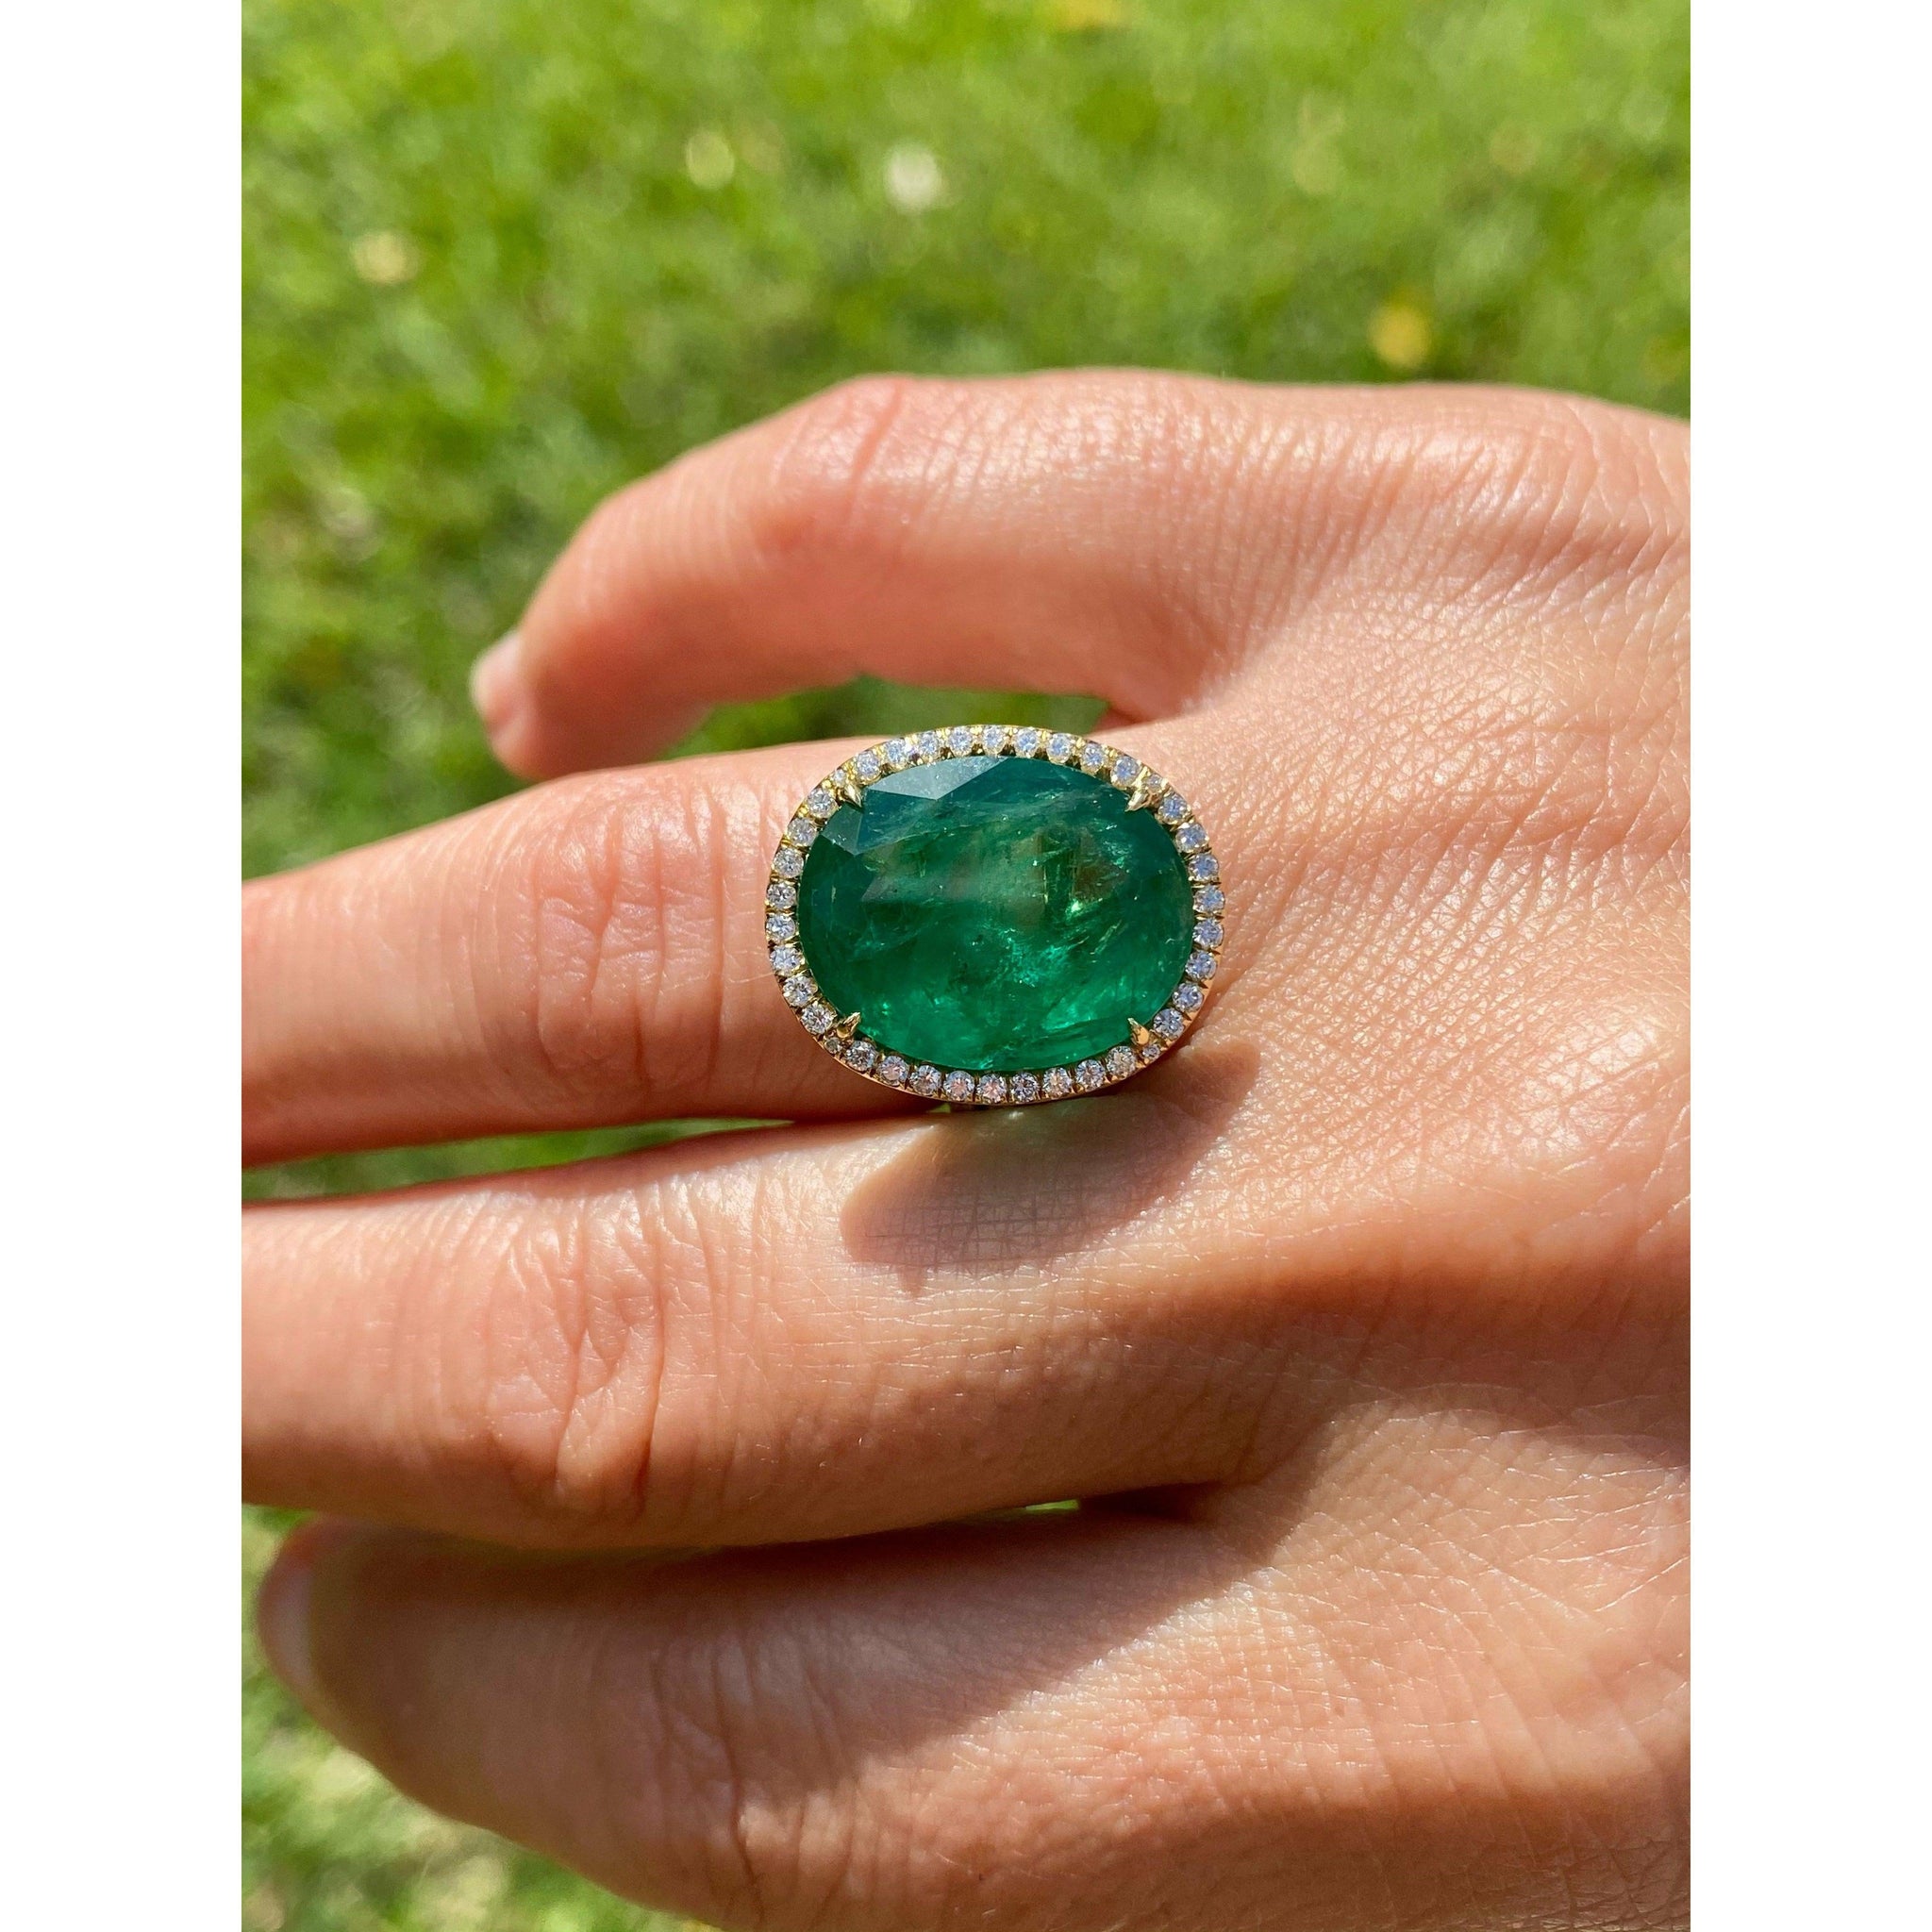 10 Carat GIA certified Oval Cut Emerald set in 18k solid gold ring - ASSAY